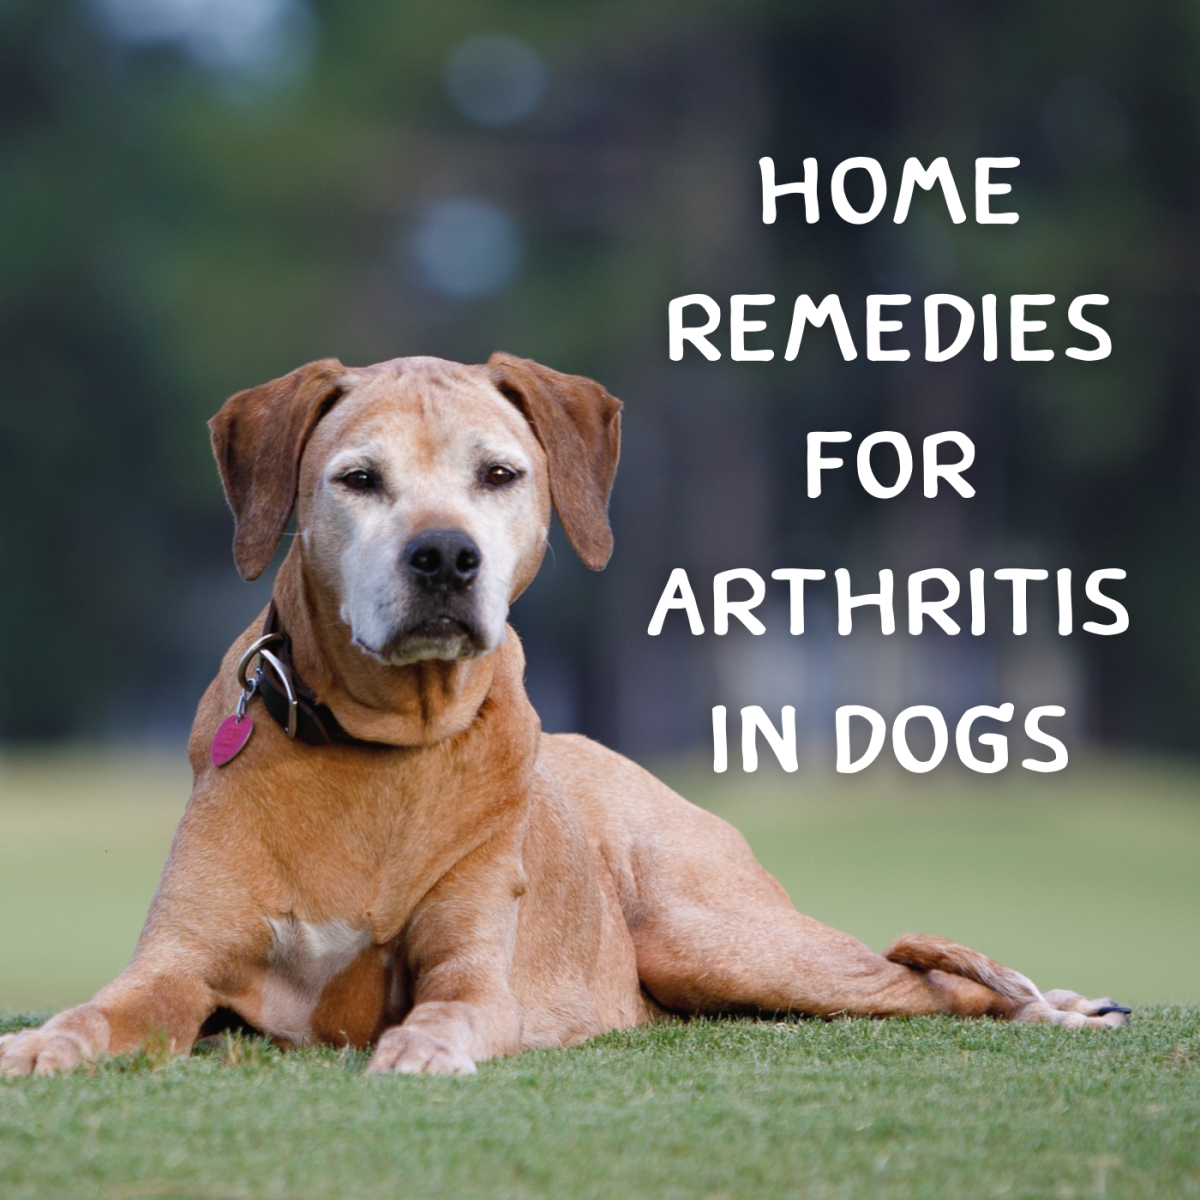 Arthritis in Dogs: Natural Home Remedies for Joint Pain